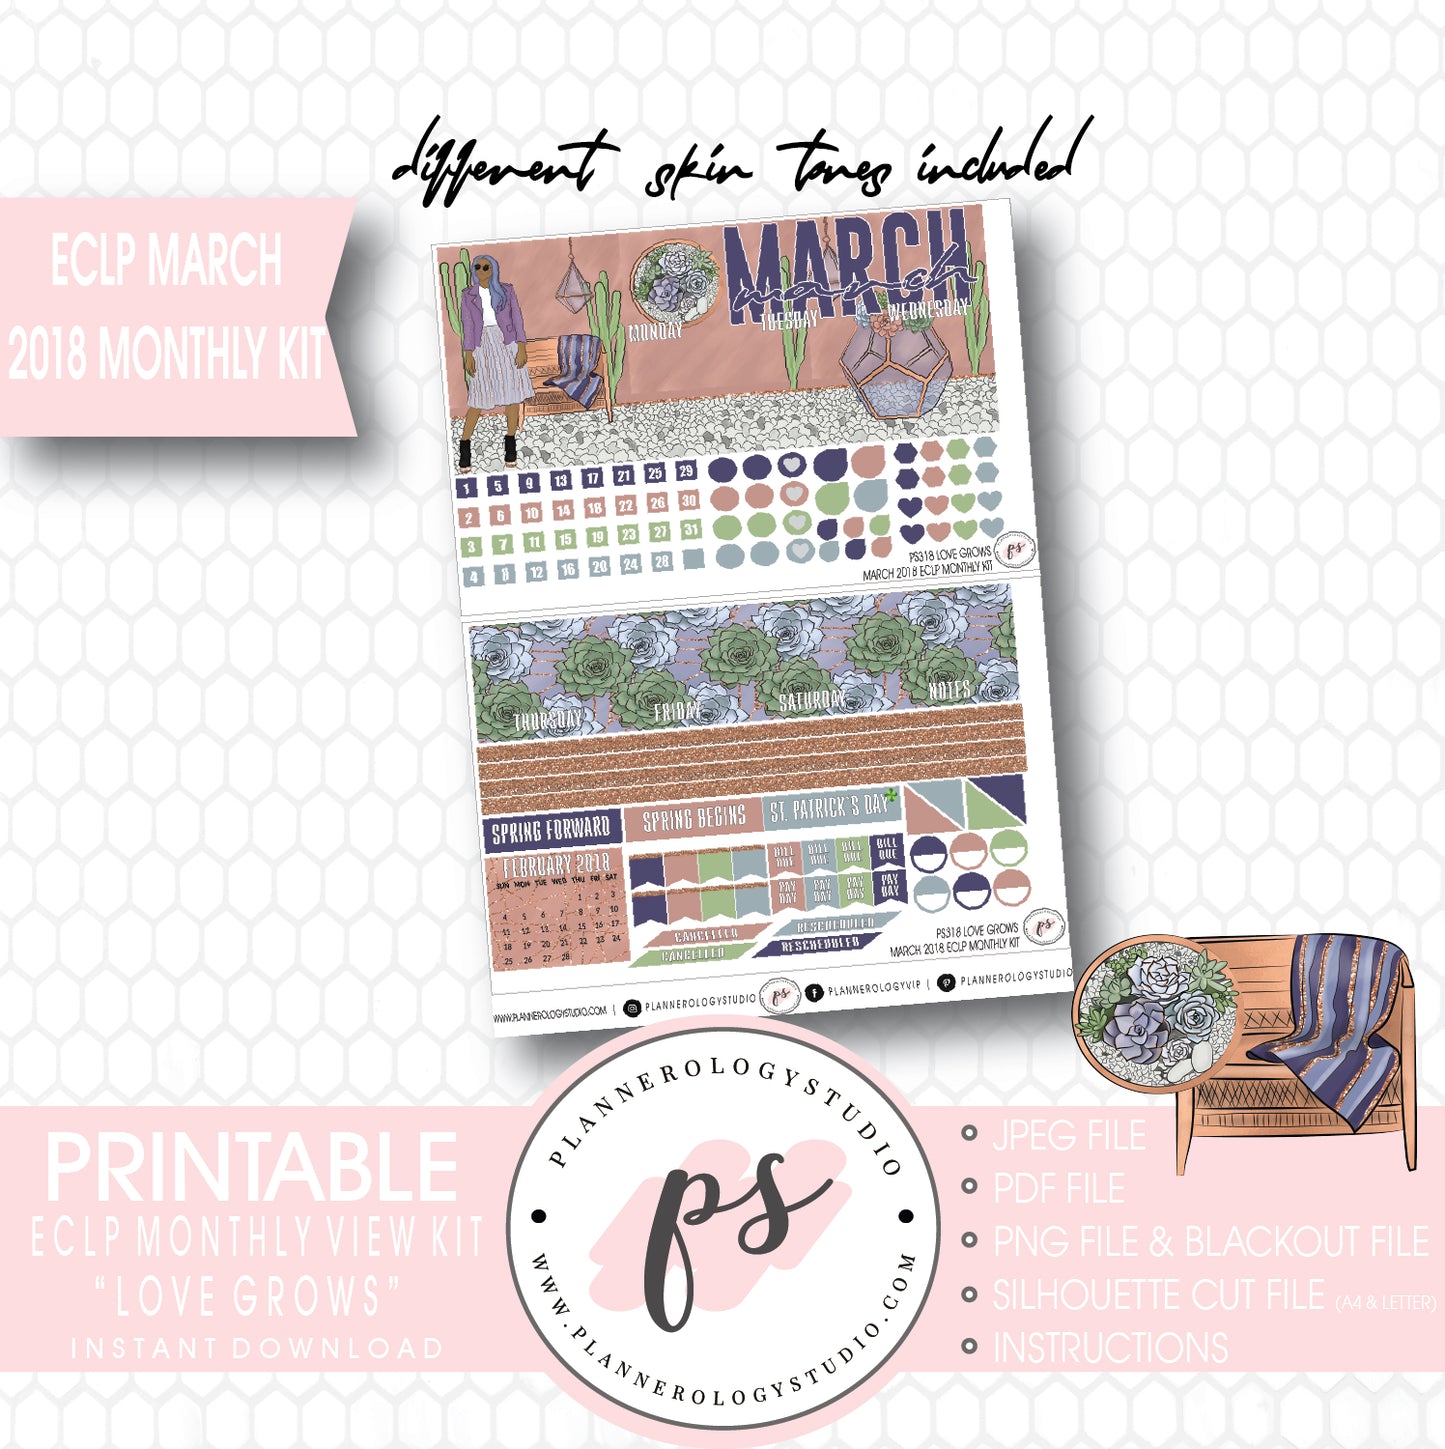 Love Grows March 2018 Monthly View Kit Digital Printable Planner Stickers (for use with ECLP) - Plannerologystudio